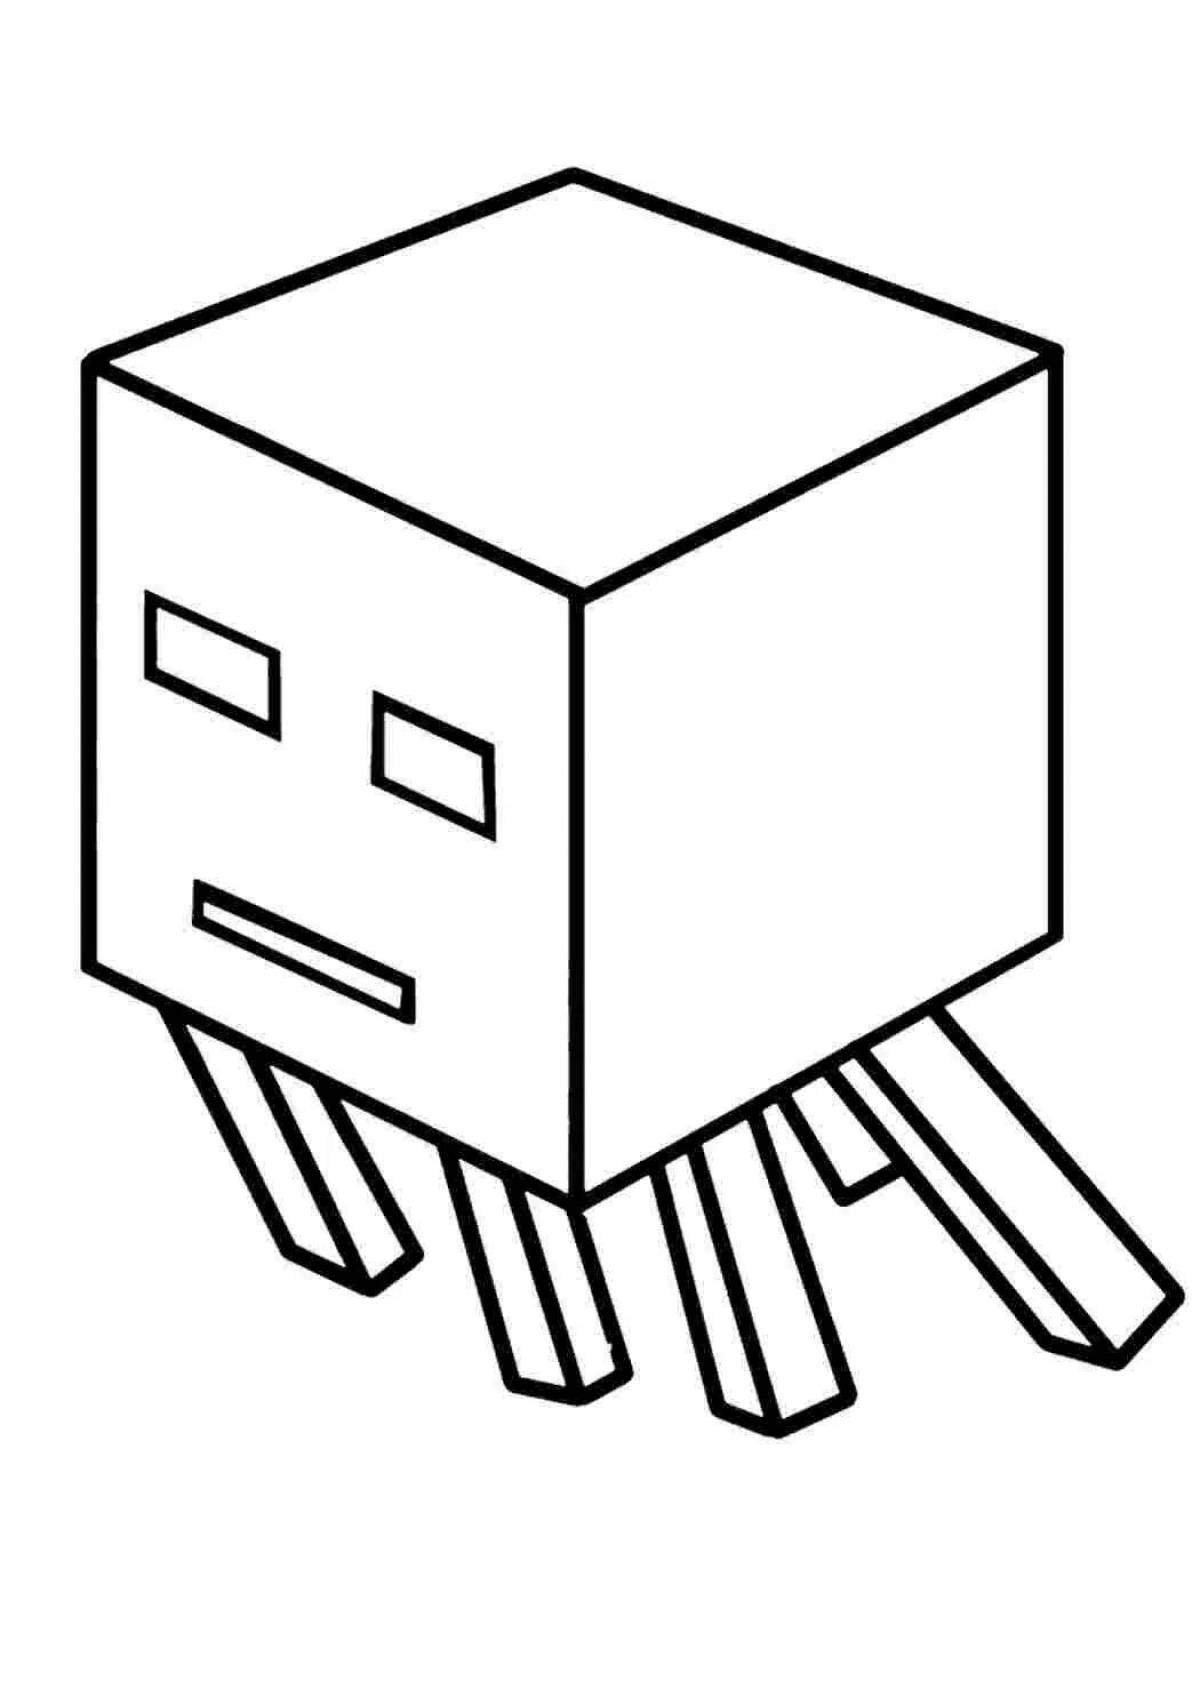 Dazzling minecraft coloring page